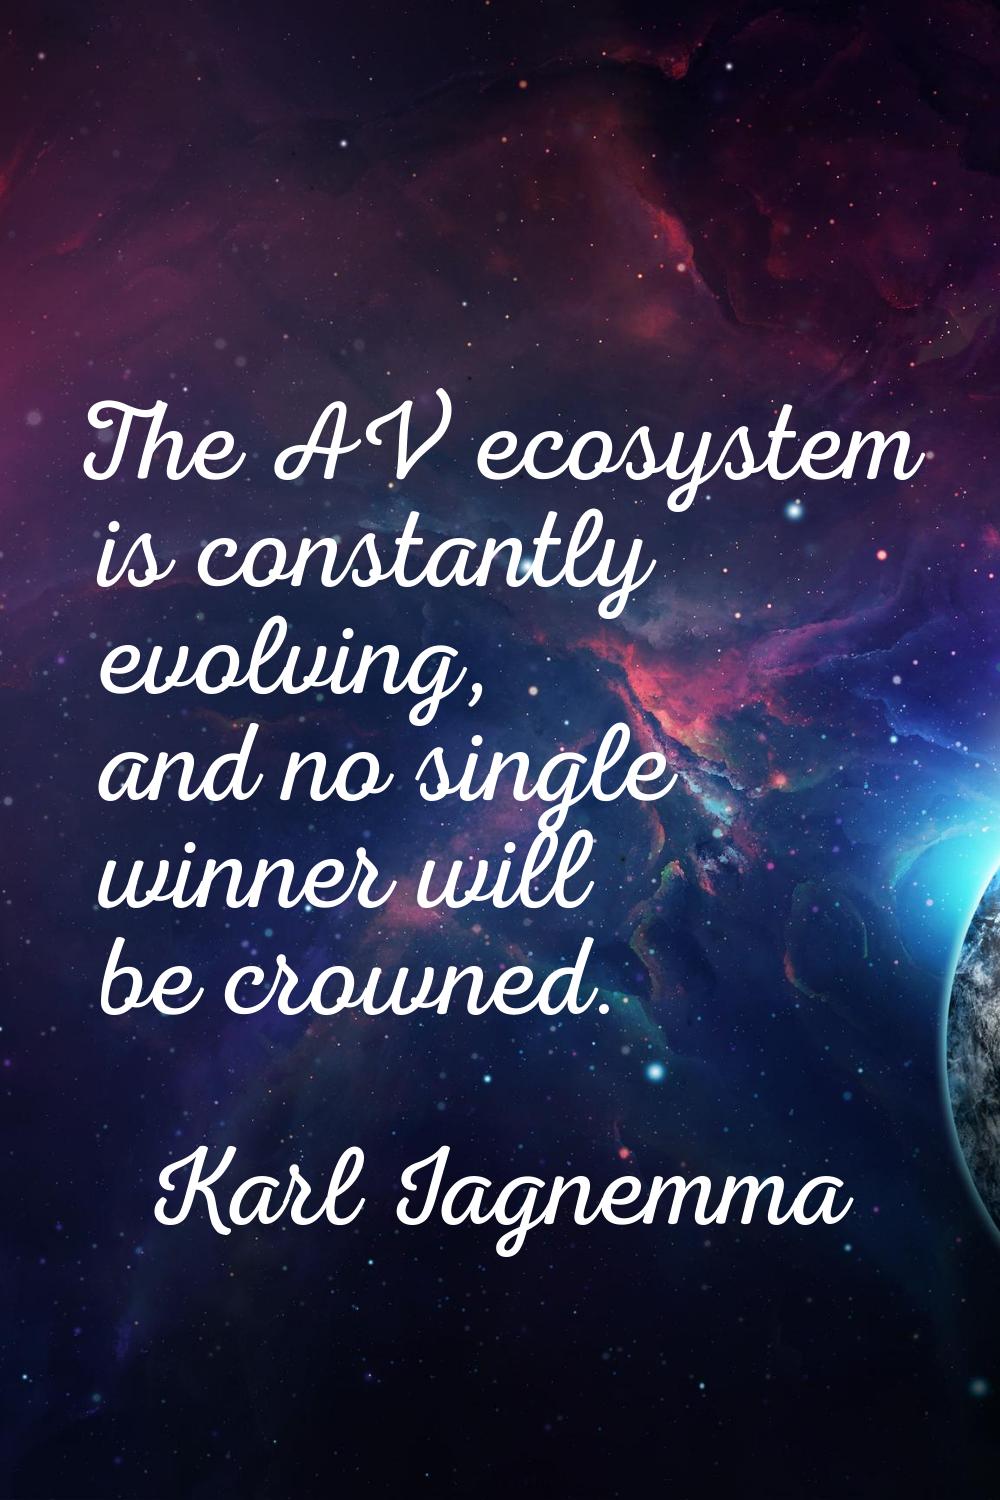 The AV ecosystem is constantly evolving, and no single winner will be crowned.